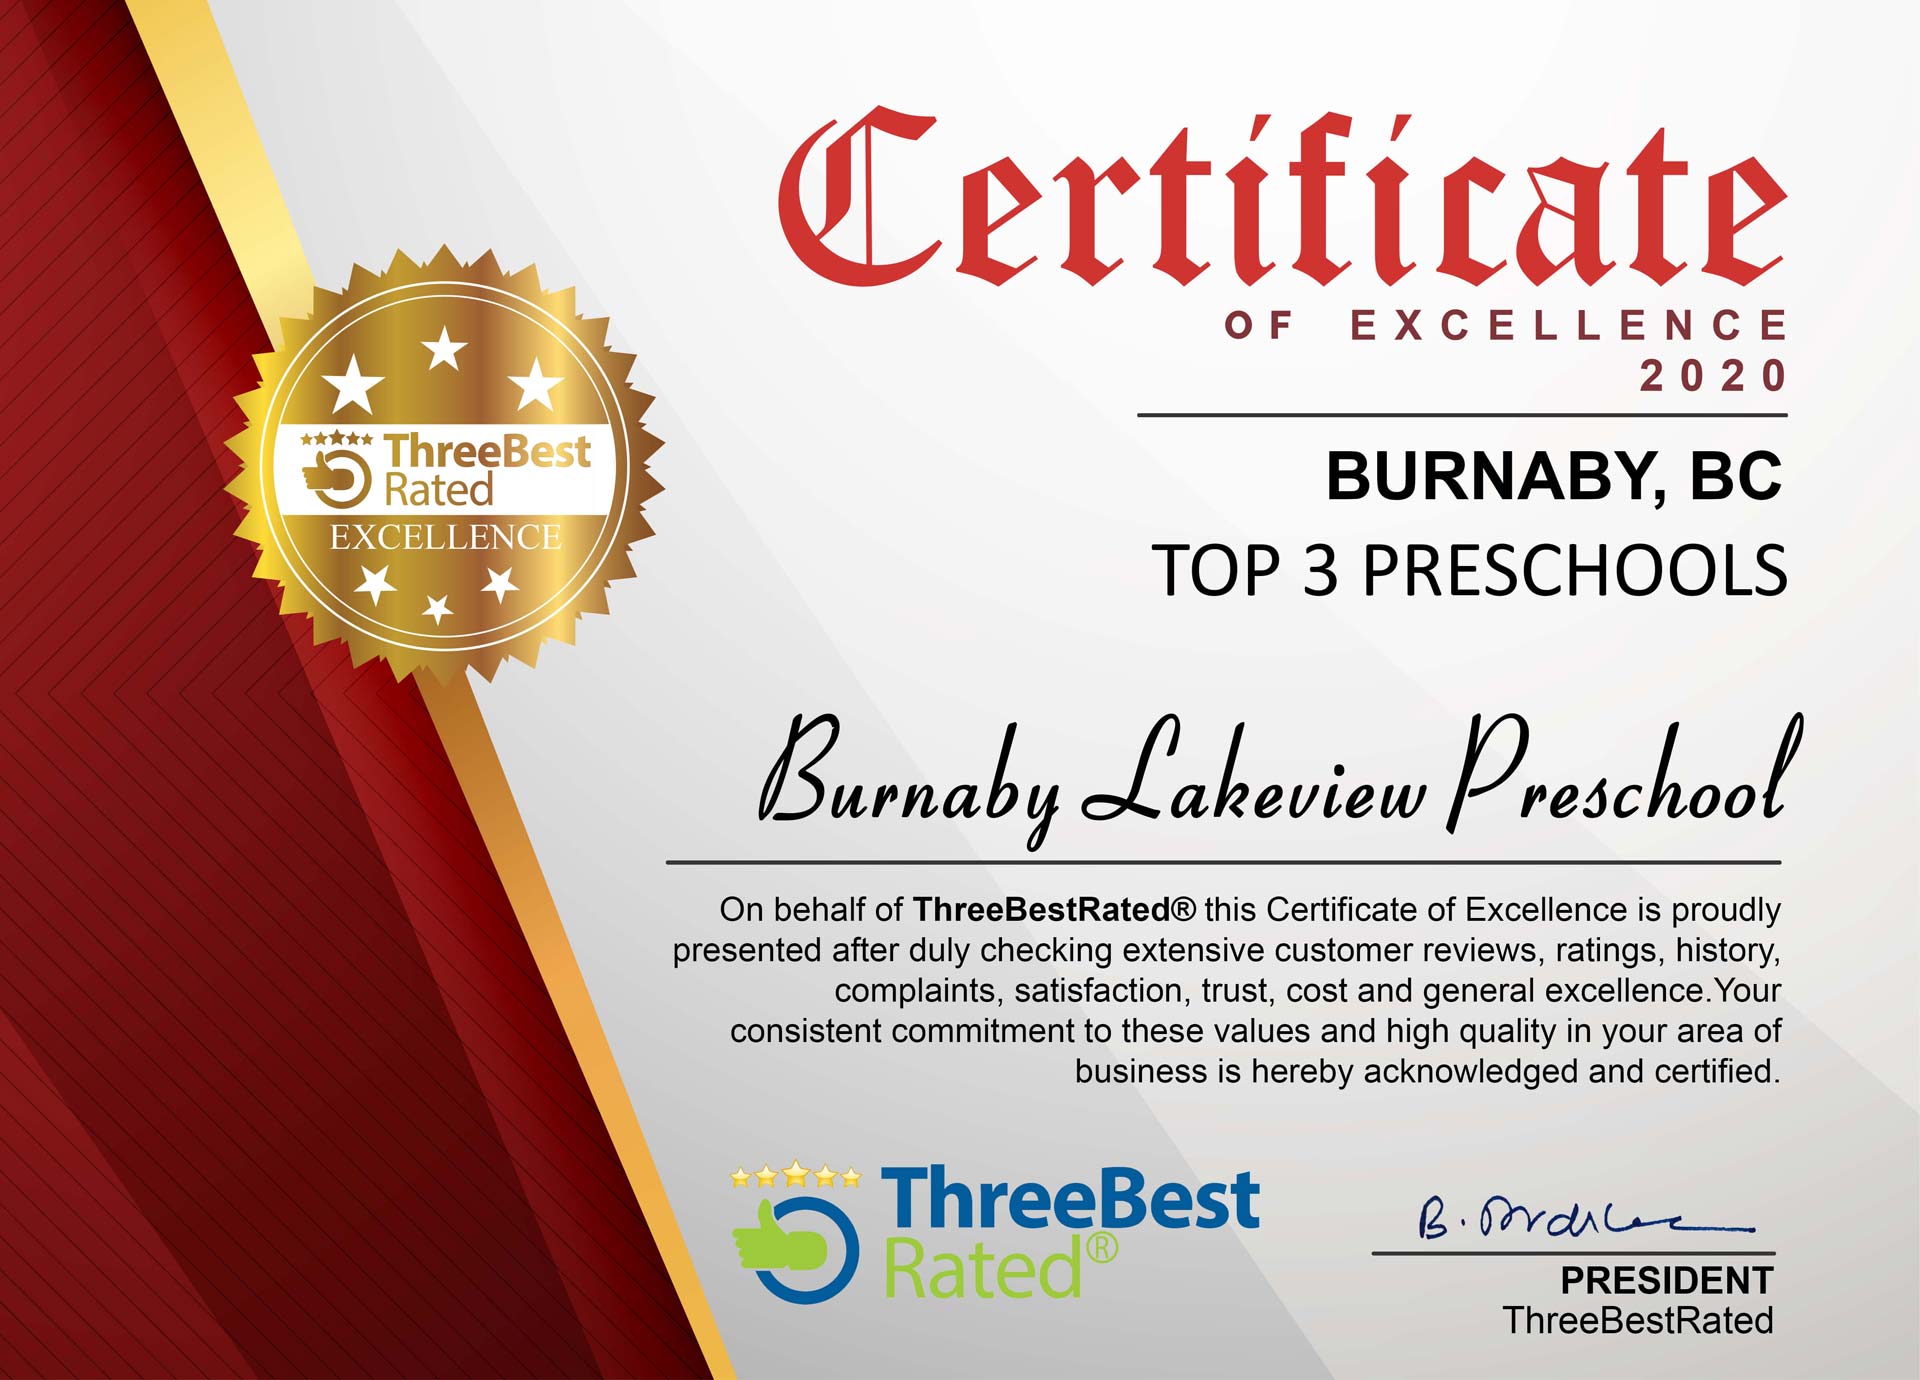 Burnaby Lakeview Preschool is recommended as one of the top 3 preschools in Burnaby BC.